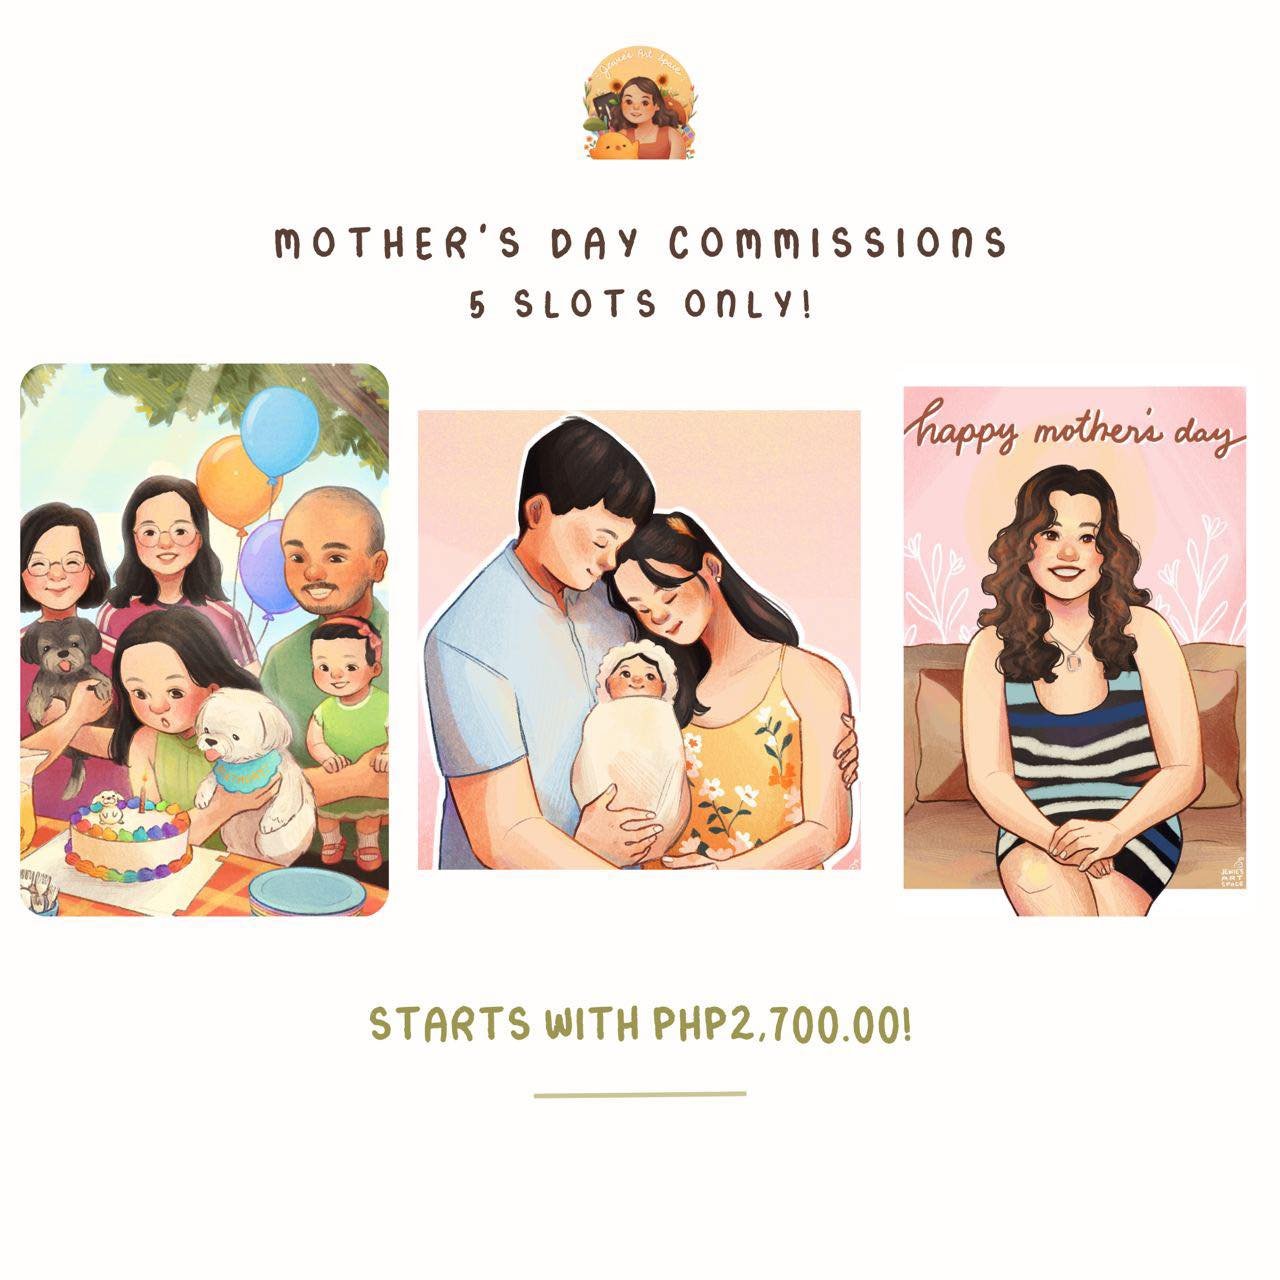 Here&rsquo;s for your mom, mama, nanay, or tita who would like an artwork for Mother&rsquo;s Day. 🤗💛

Maybe you have a favorite memory with her or a dream you would like to achieve together?
Let&rsquo;s draw that! 🥹

Currently accepting 5 slots on